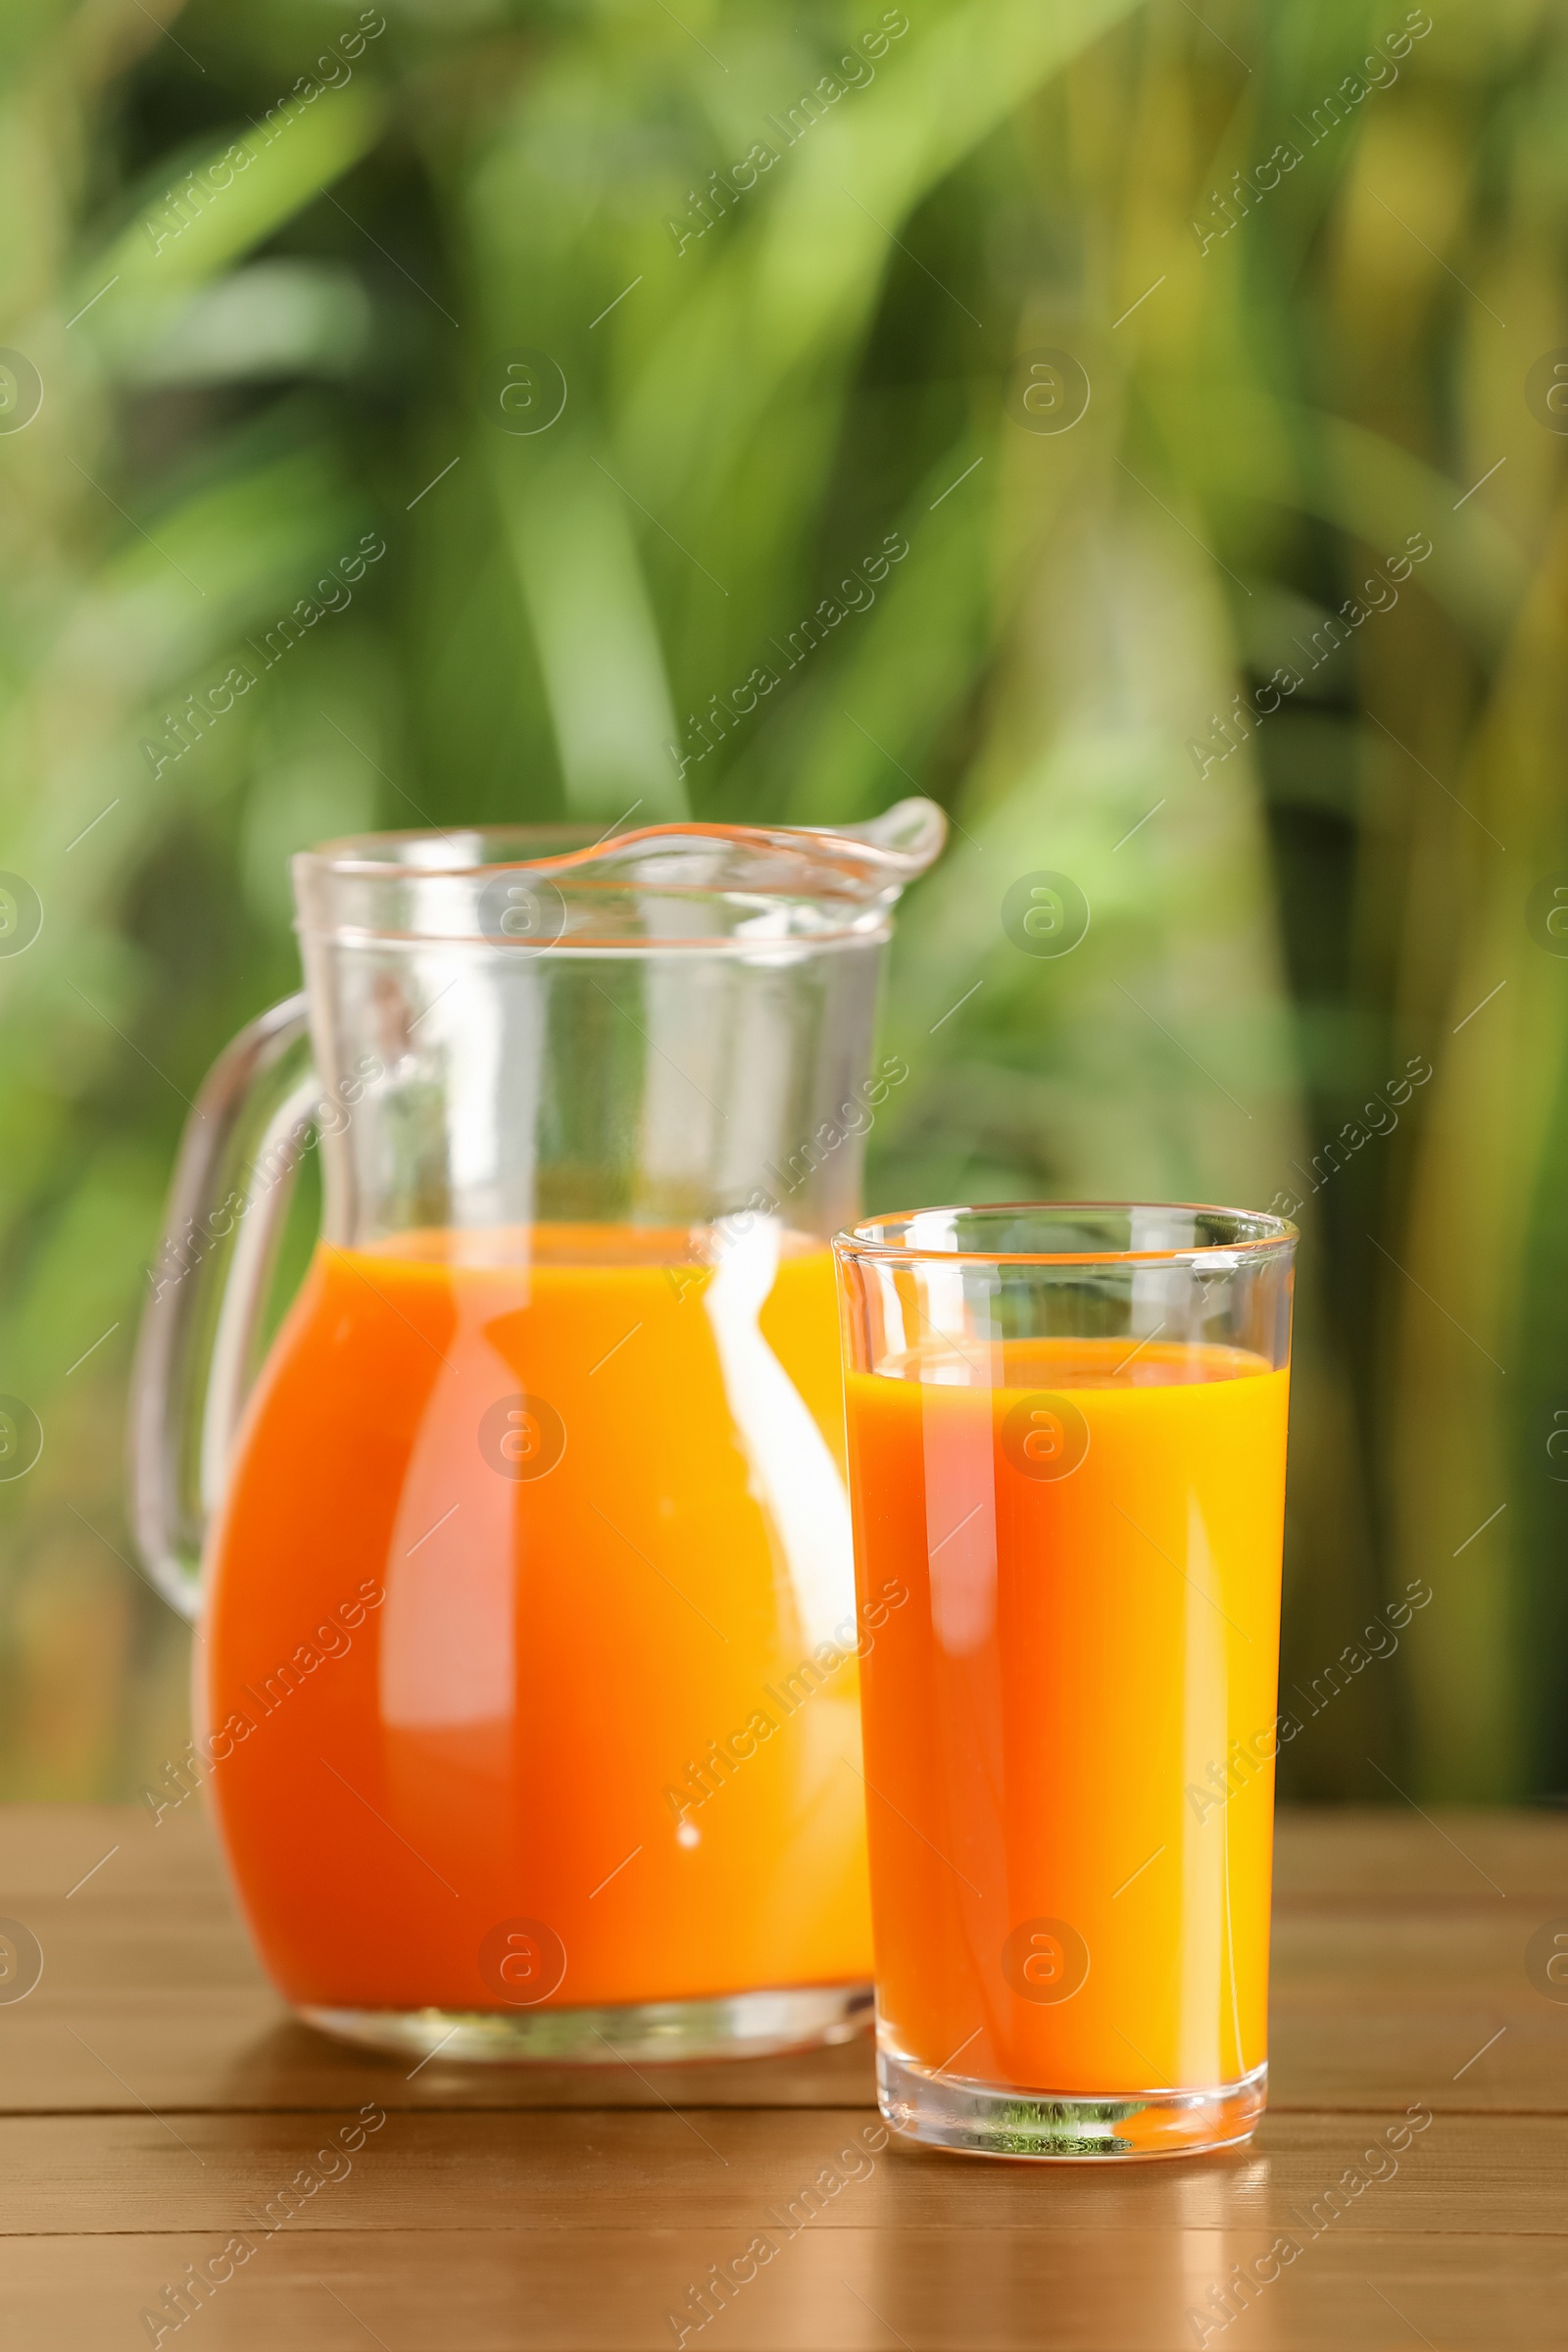 Photo of Tasty refreshing carrot juice on wooden table outdoors